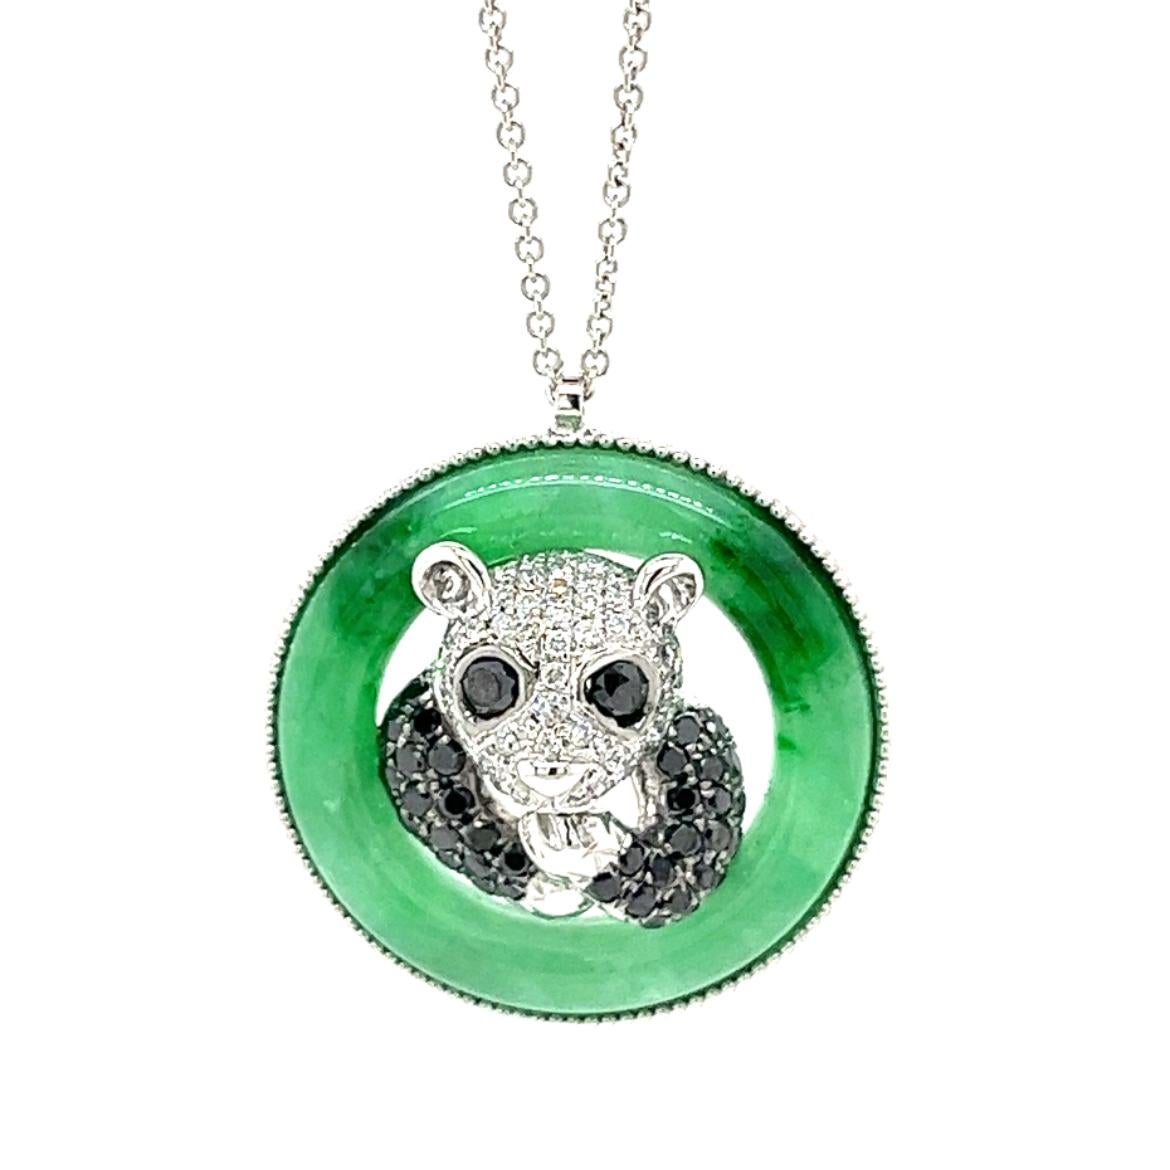 18K White Gold Jade Bamboo & Panda Necklace with Diamonds

38 Black Diamonds - 0.57 CT
65 Diamonds - 0.32 CT
1 Jade - 8.08 CT
18K White Gold - 8.21 GM

The captivating 18K gold Panda pendant is a true work of art, effortlessly blending elegance and